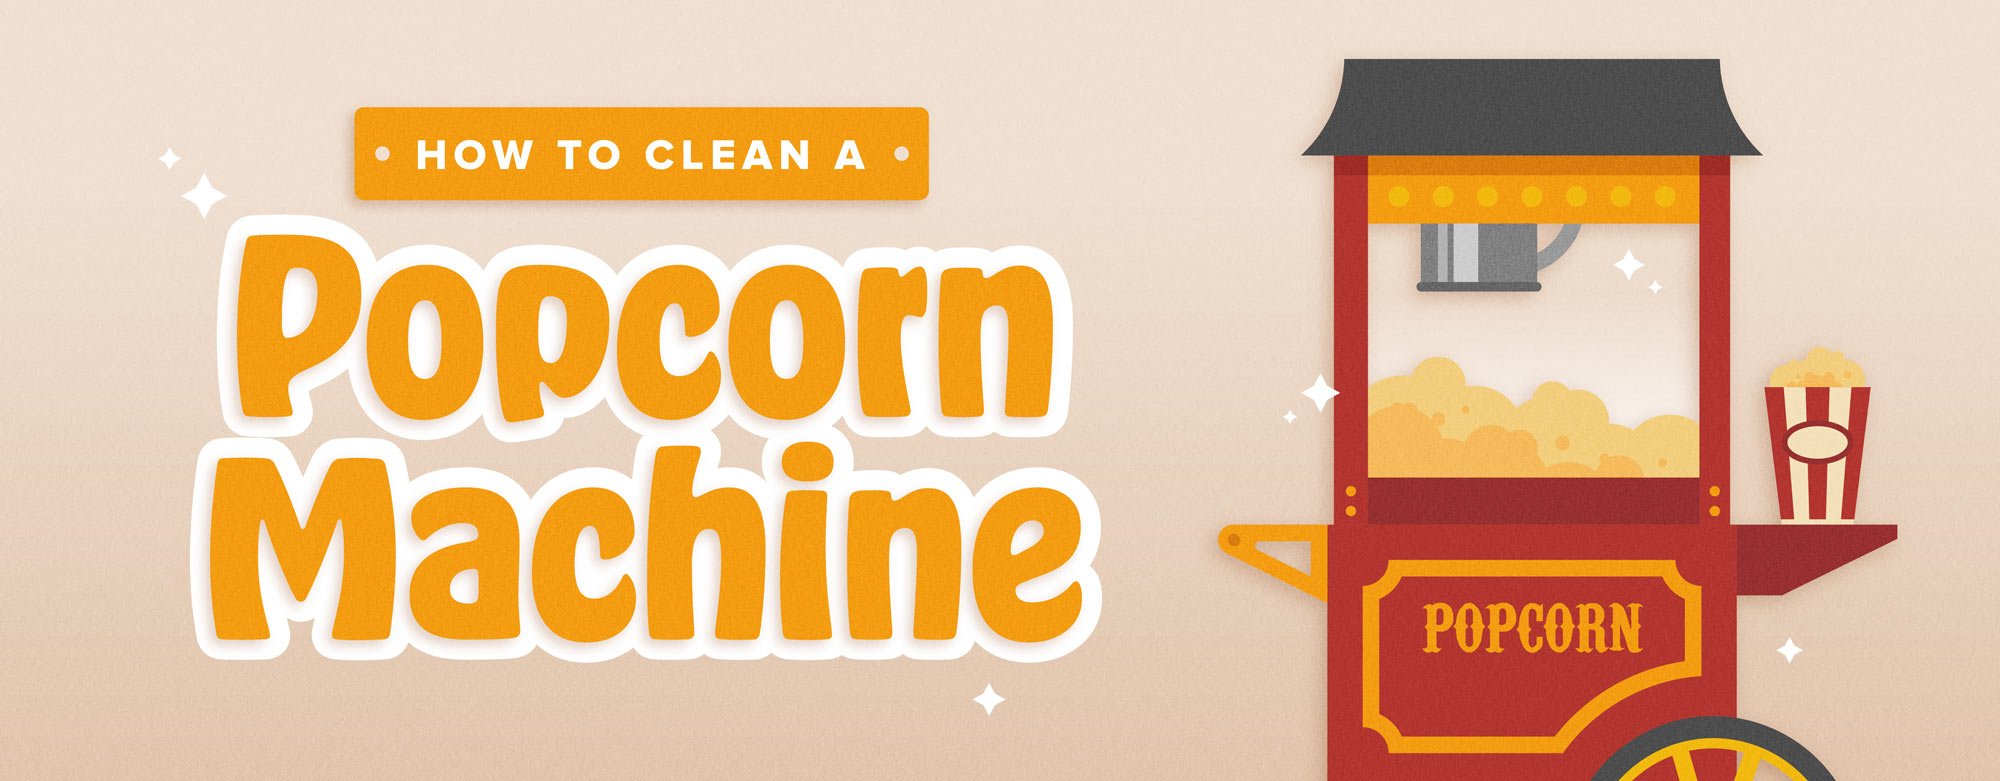 How to Clean a Popcorn Machine